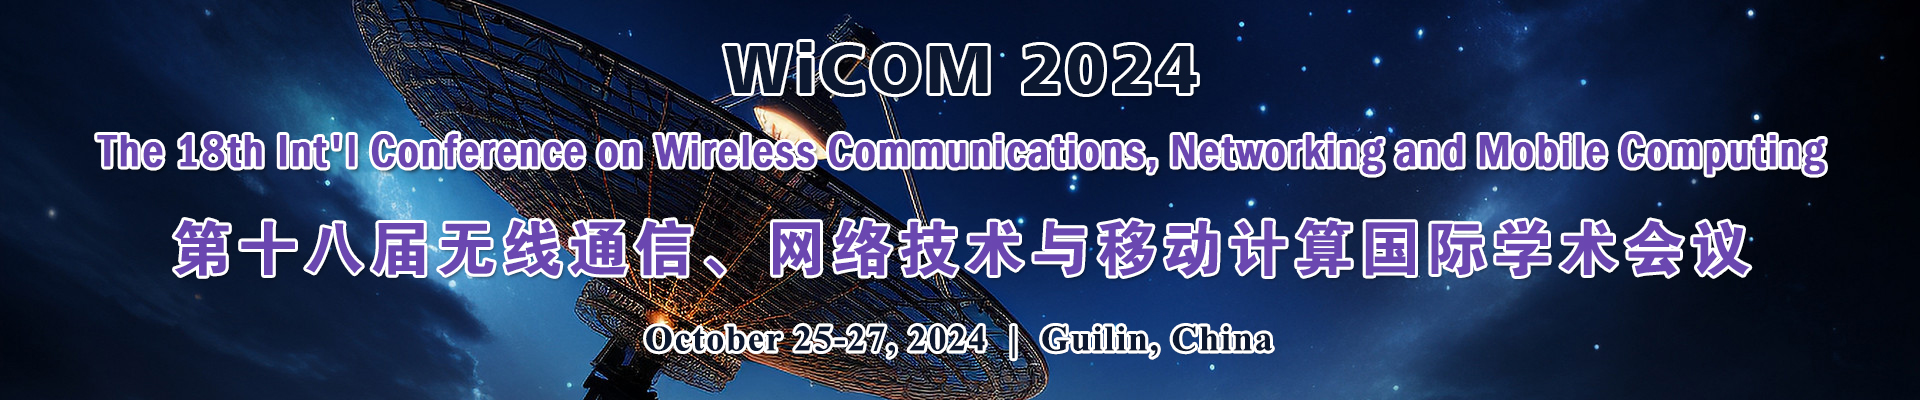 The 18th Int'l Conference on Wireless Communications, Networking and Mobile Computing (WiCOM 2024), Guilin, Guangxi, China